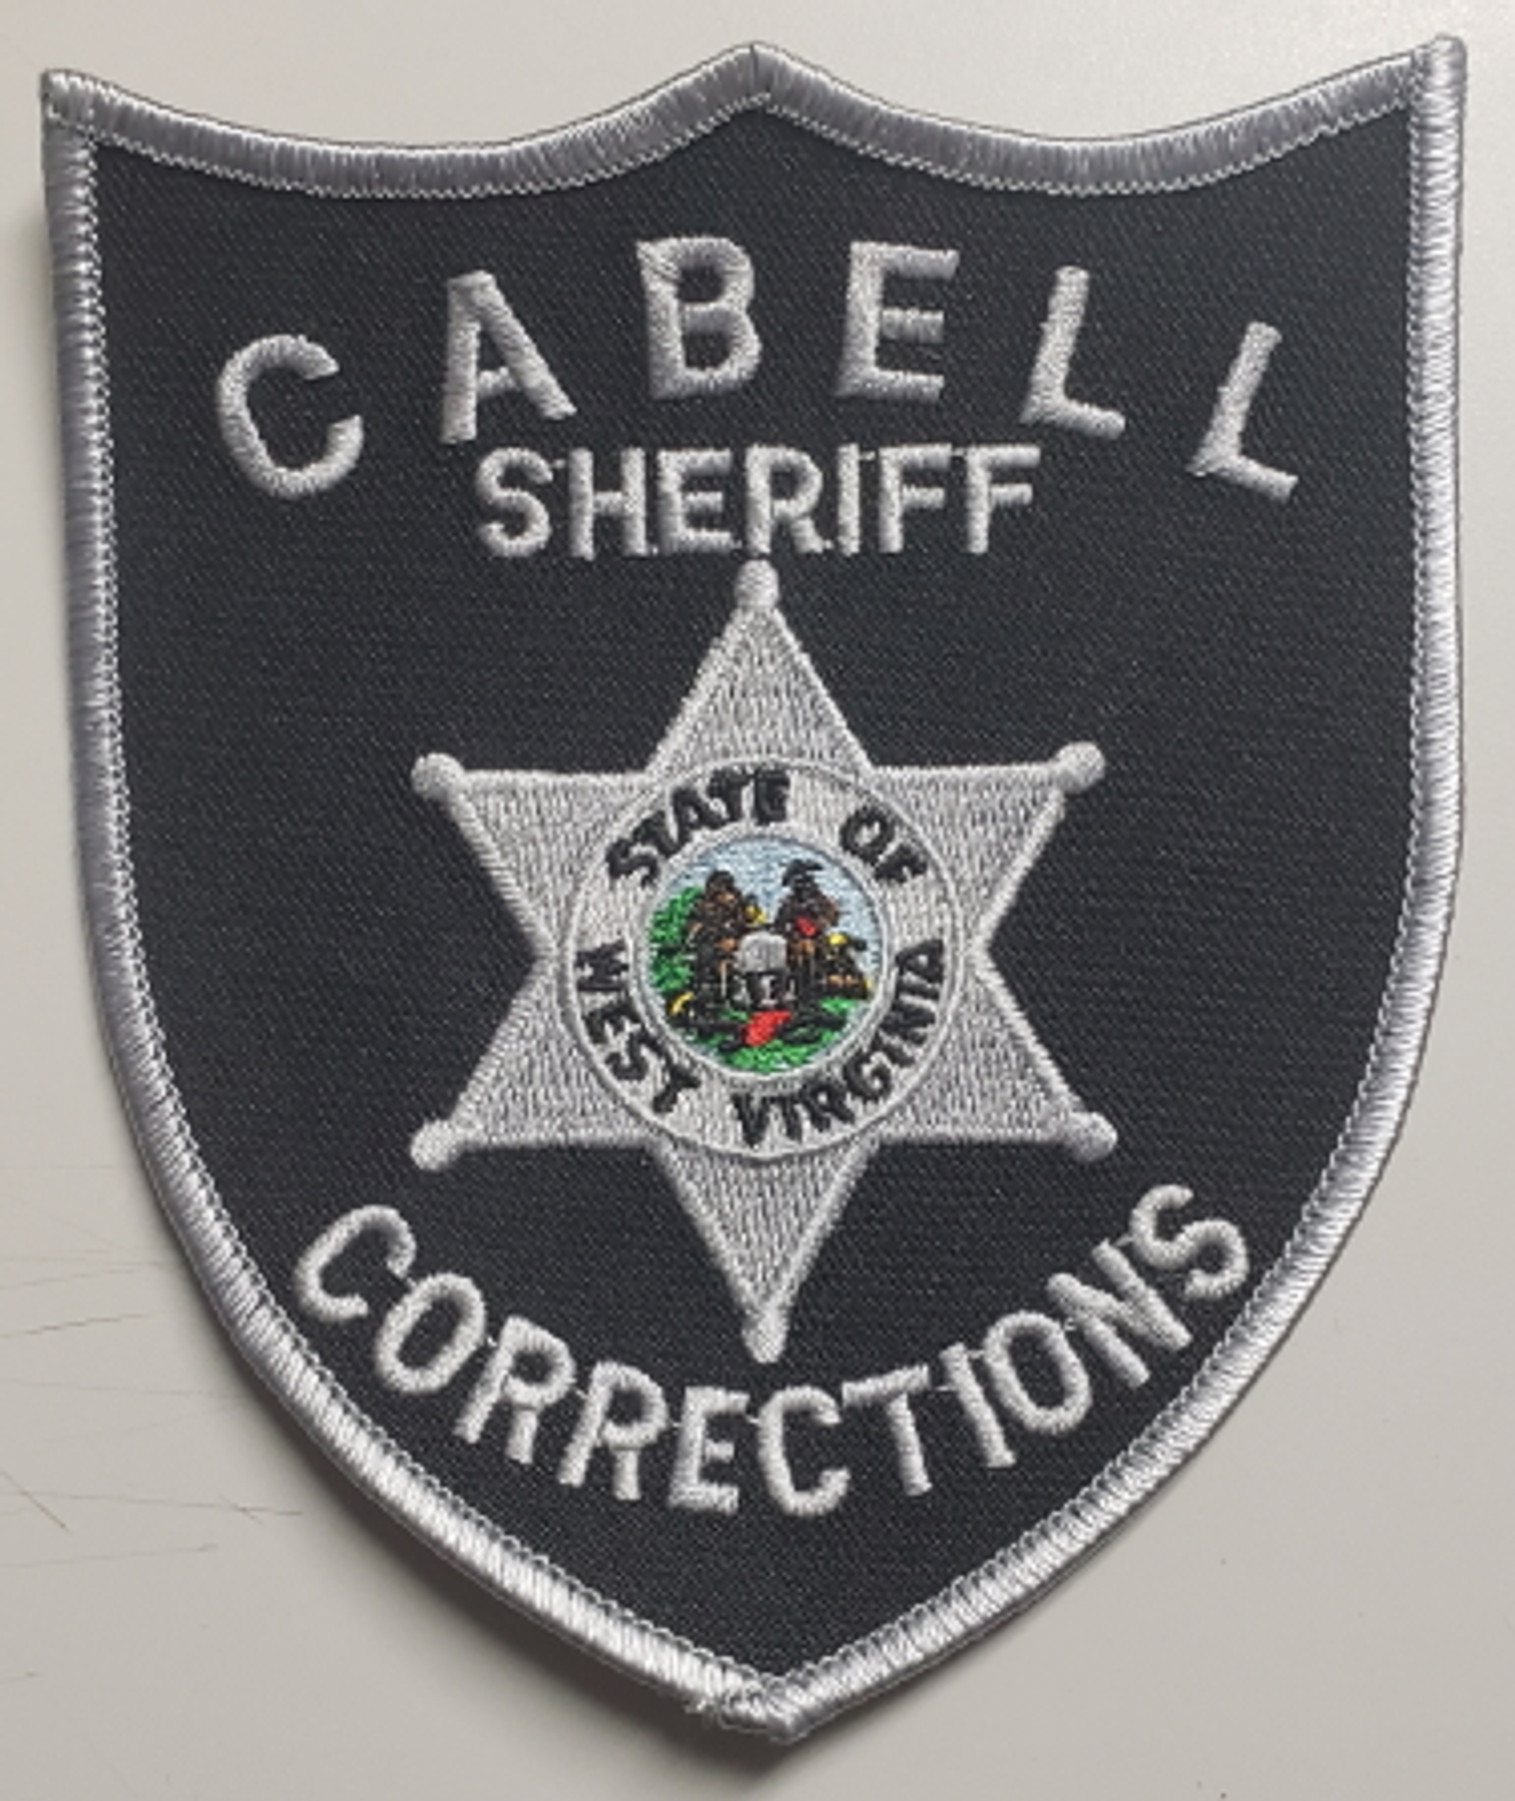 Cabell Sheriff Corrections WV Police Patch - SILVER